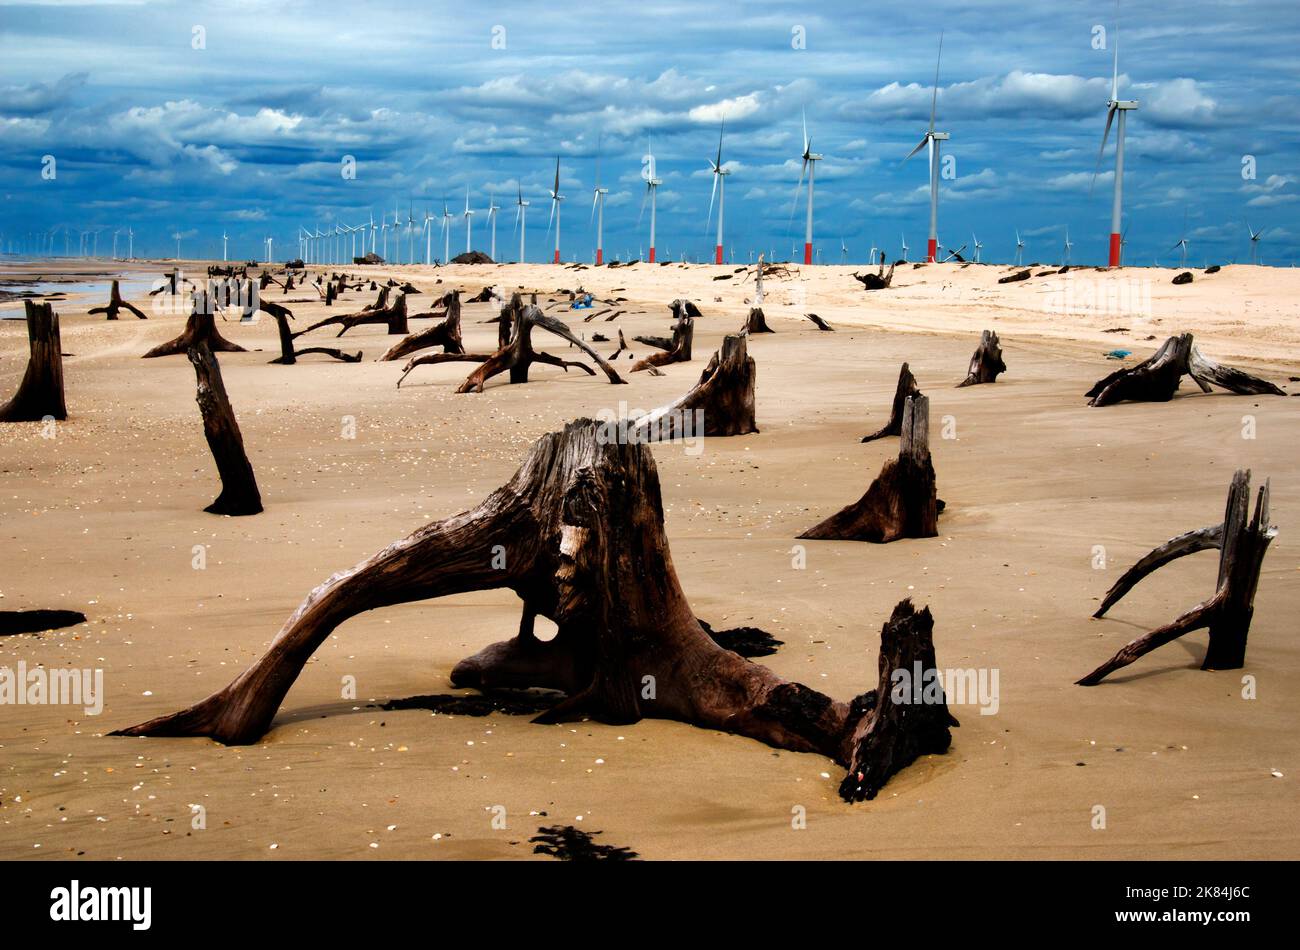 Delta do Parnaiba Wind Farm  is a wind power plant ocated in Piaui, Brazil. The wood stumps on the beech were thrown there by strong winds and waves. Stock Photo